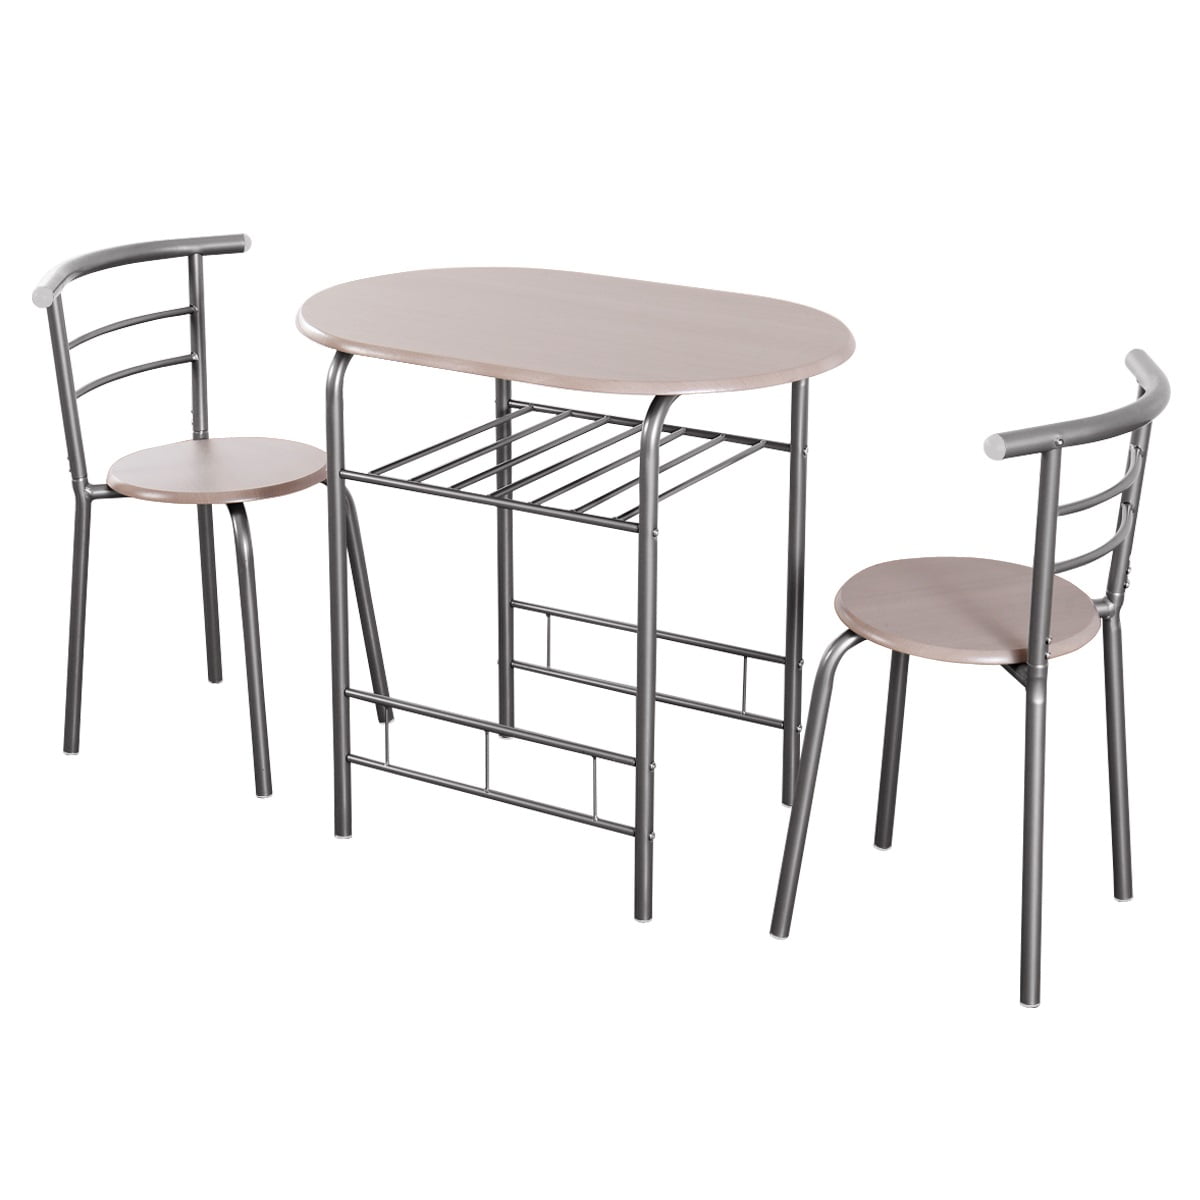 Topbuy 3 PCS Kitchen Dining Set Compact Bistro Pub 2 Chairs & Table ...